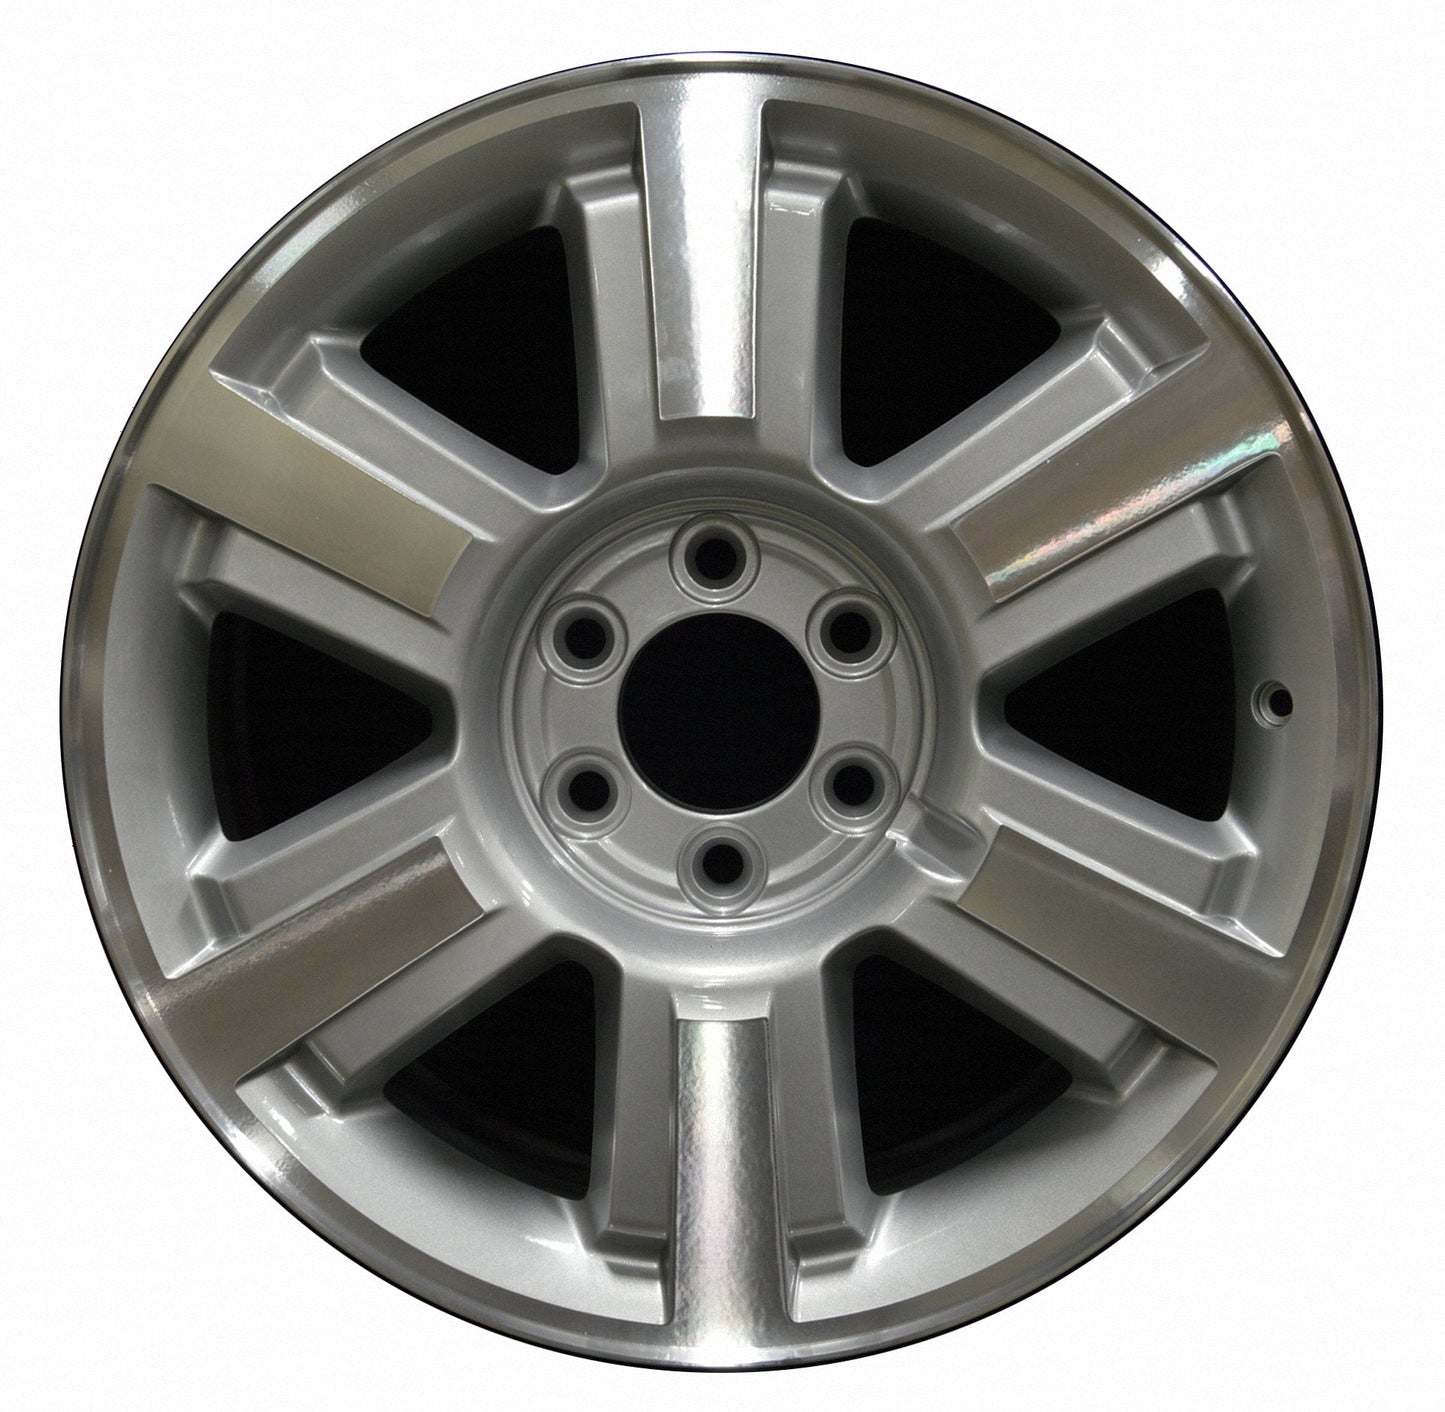 Ford F150 Truck  2006, 2007, 2008 Factory OEM Car Wheel Size 20x8.5 Alloy WAO.3646.PS01.MA